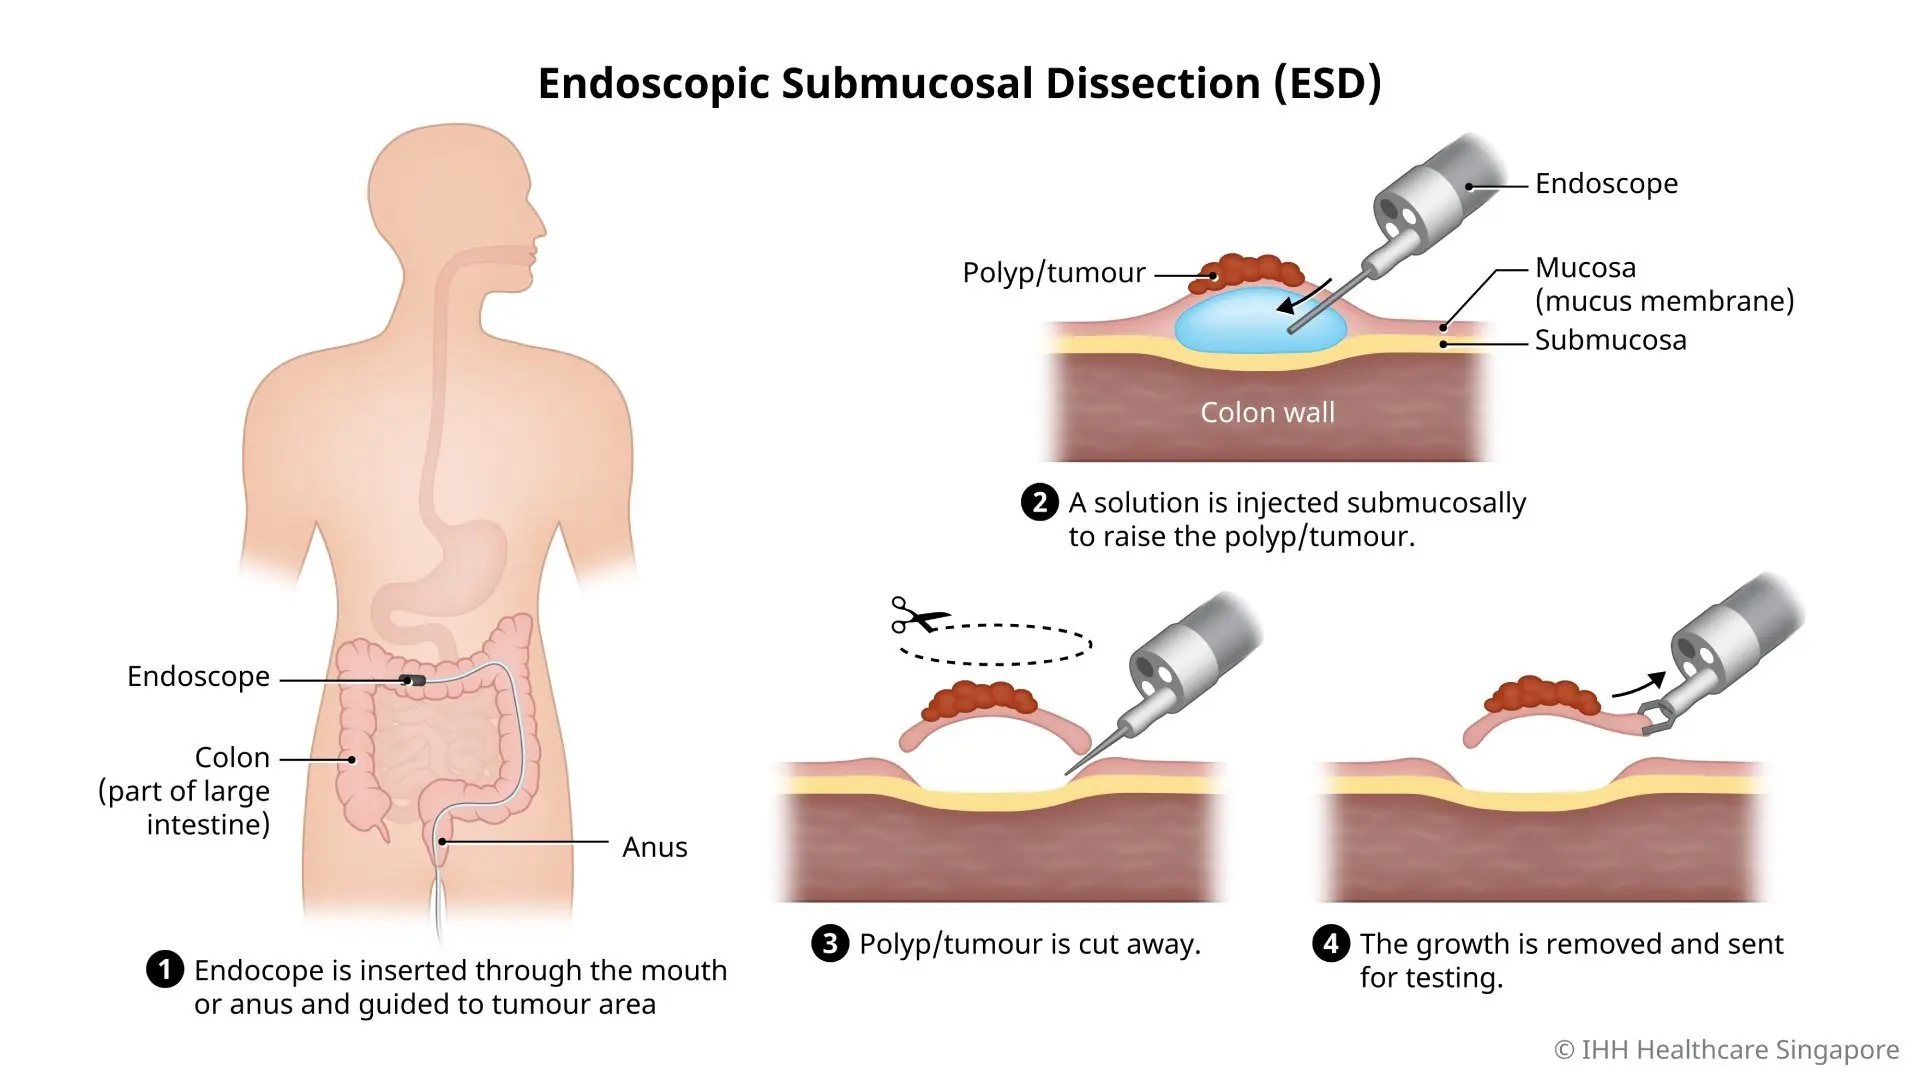 Illustration of the steps in an endoscopic submucosal dissection (ESD).